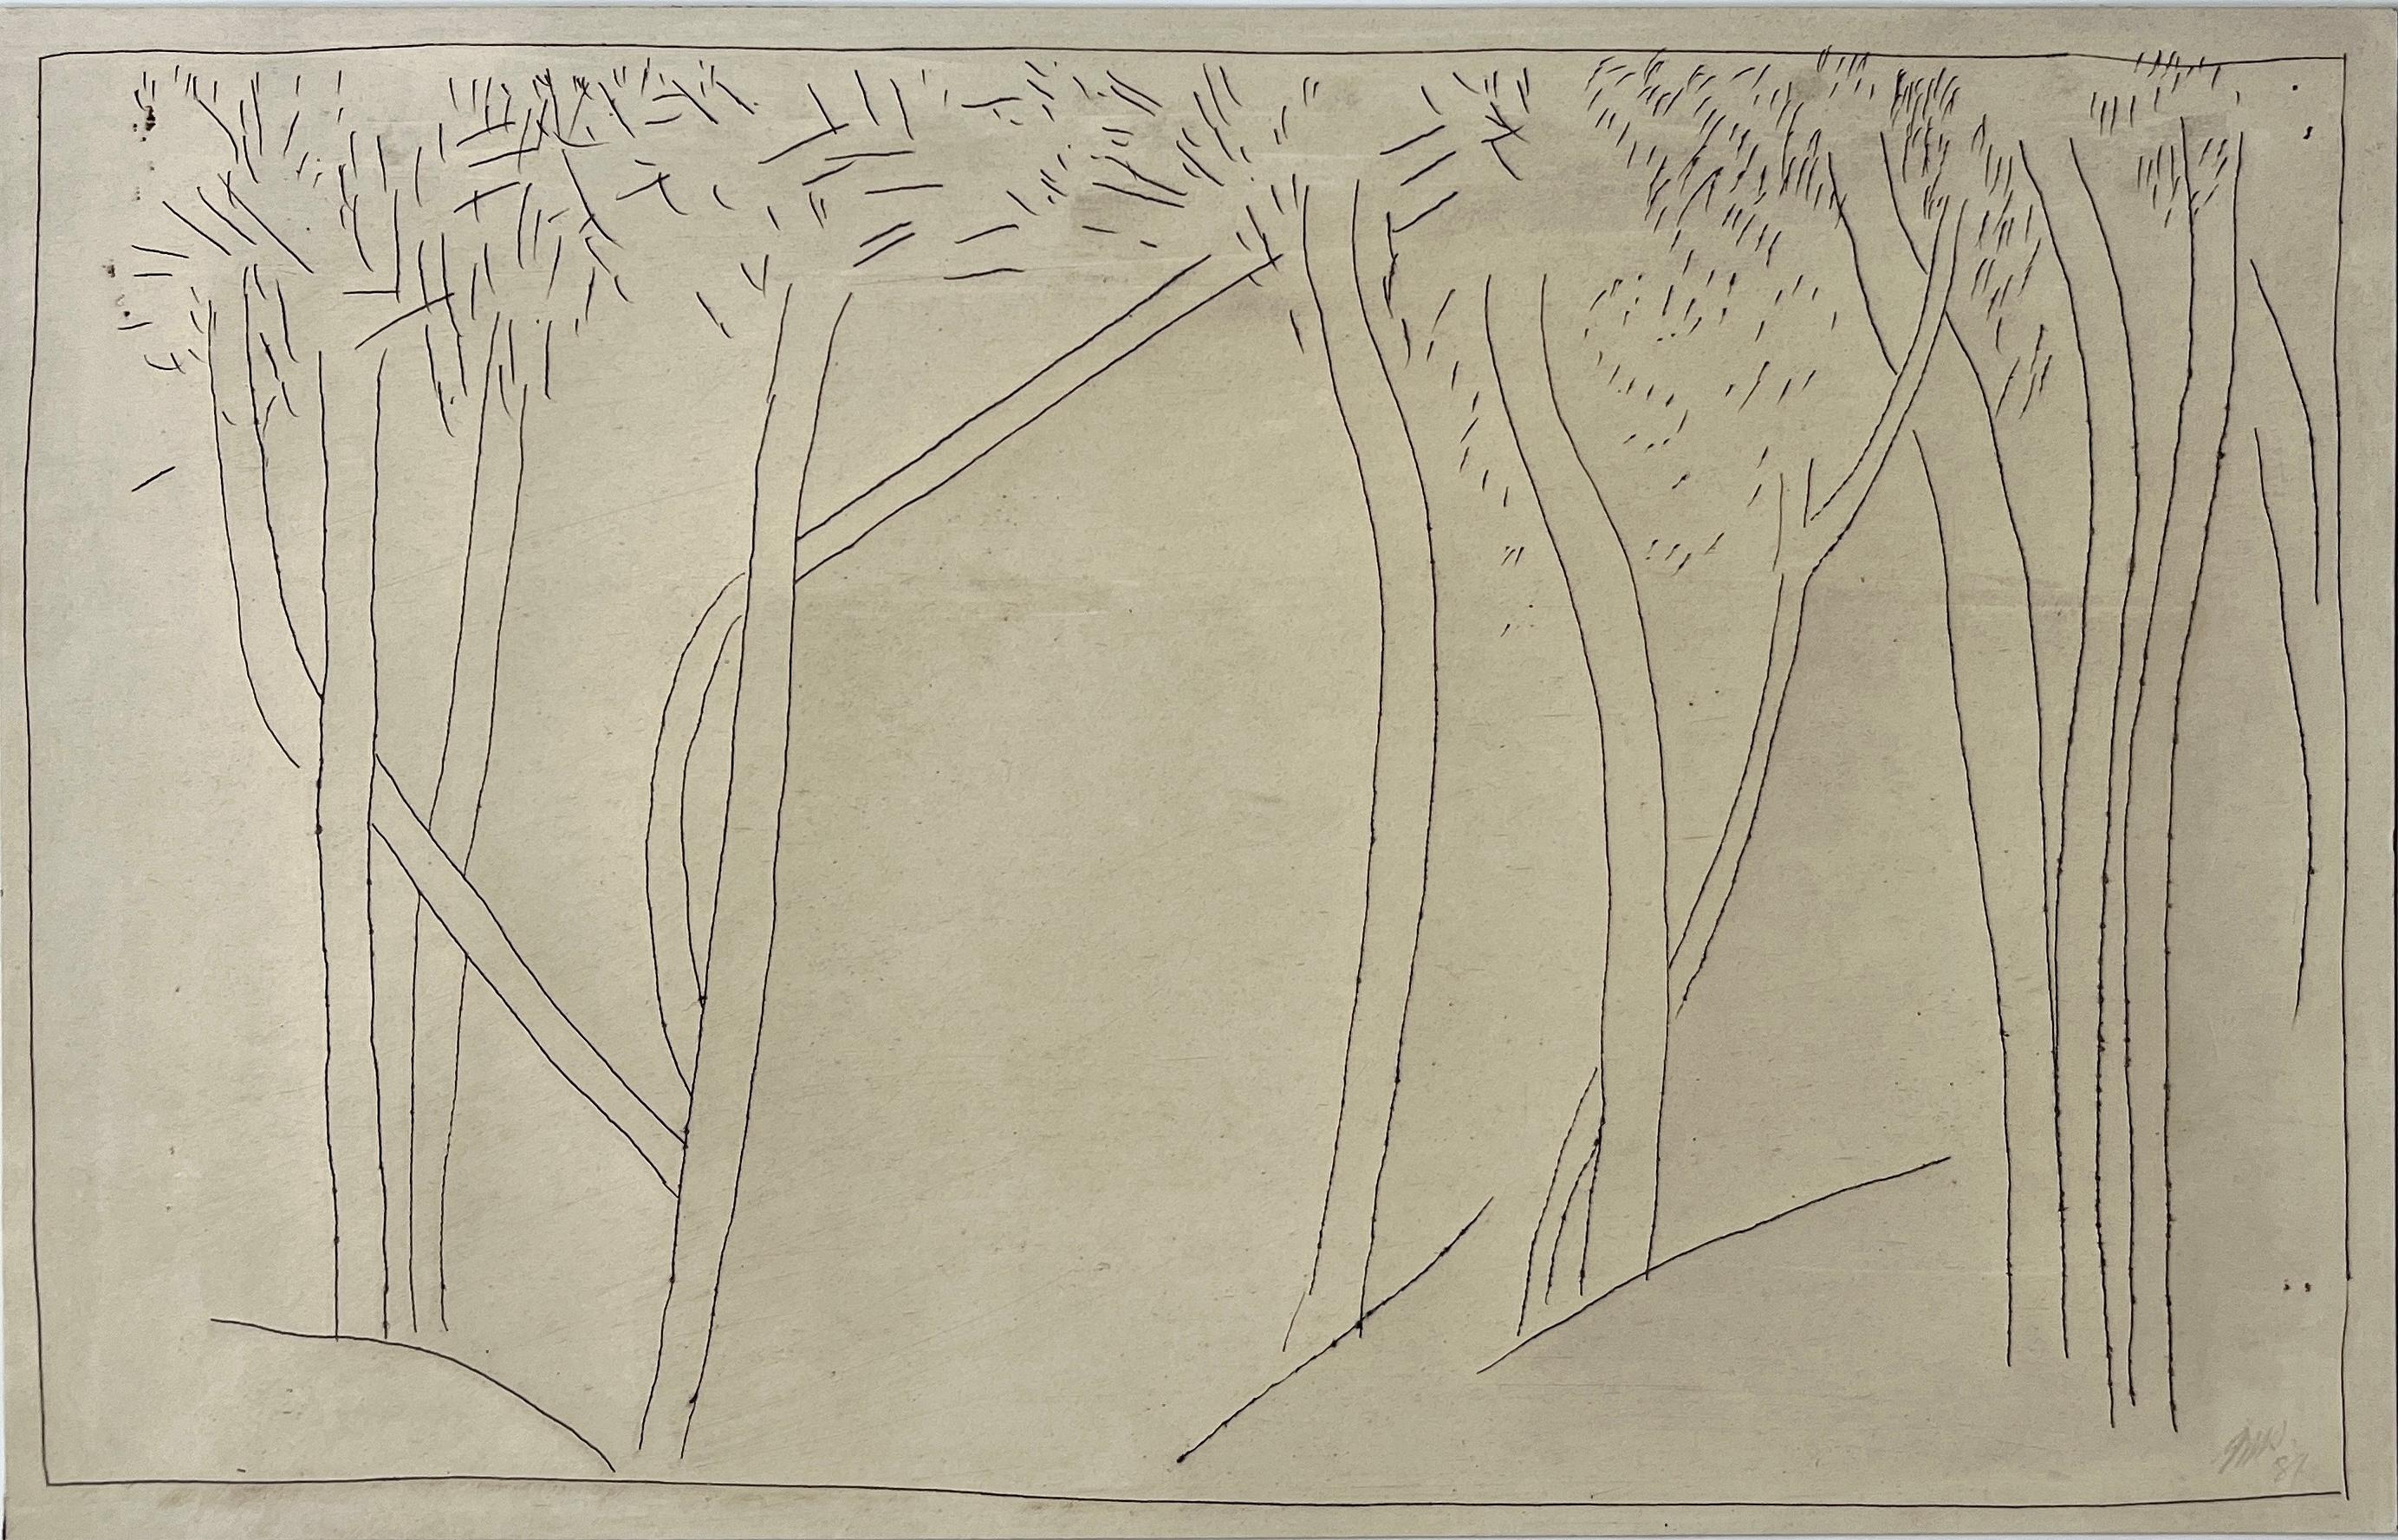 Jack Hooper
"Tree Landscape"
1981
Ink on glossy paper
11"x7" unframed
Signed and dated in pencil lower right

Embrace the serene beauty of nature through this abstract line drawing by artist Jack Hooper. Inspired by the essence of simplicity, Hooper